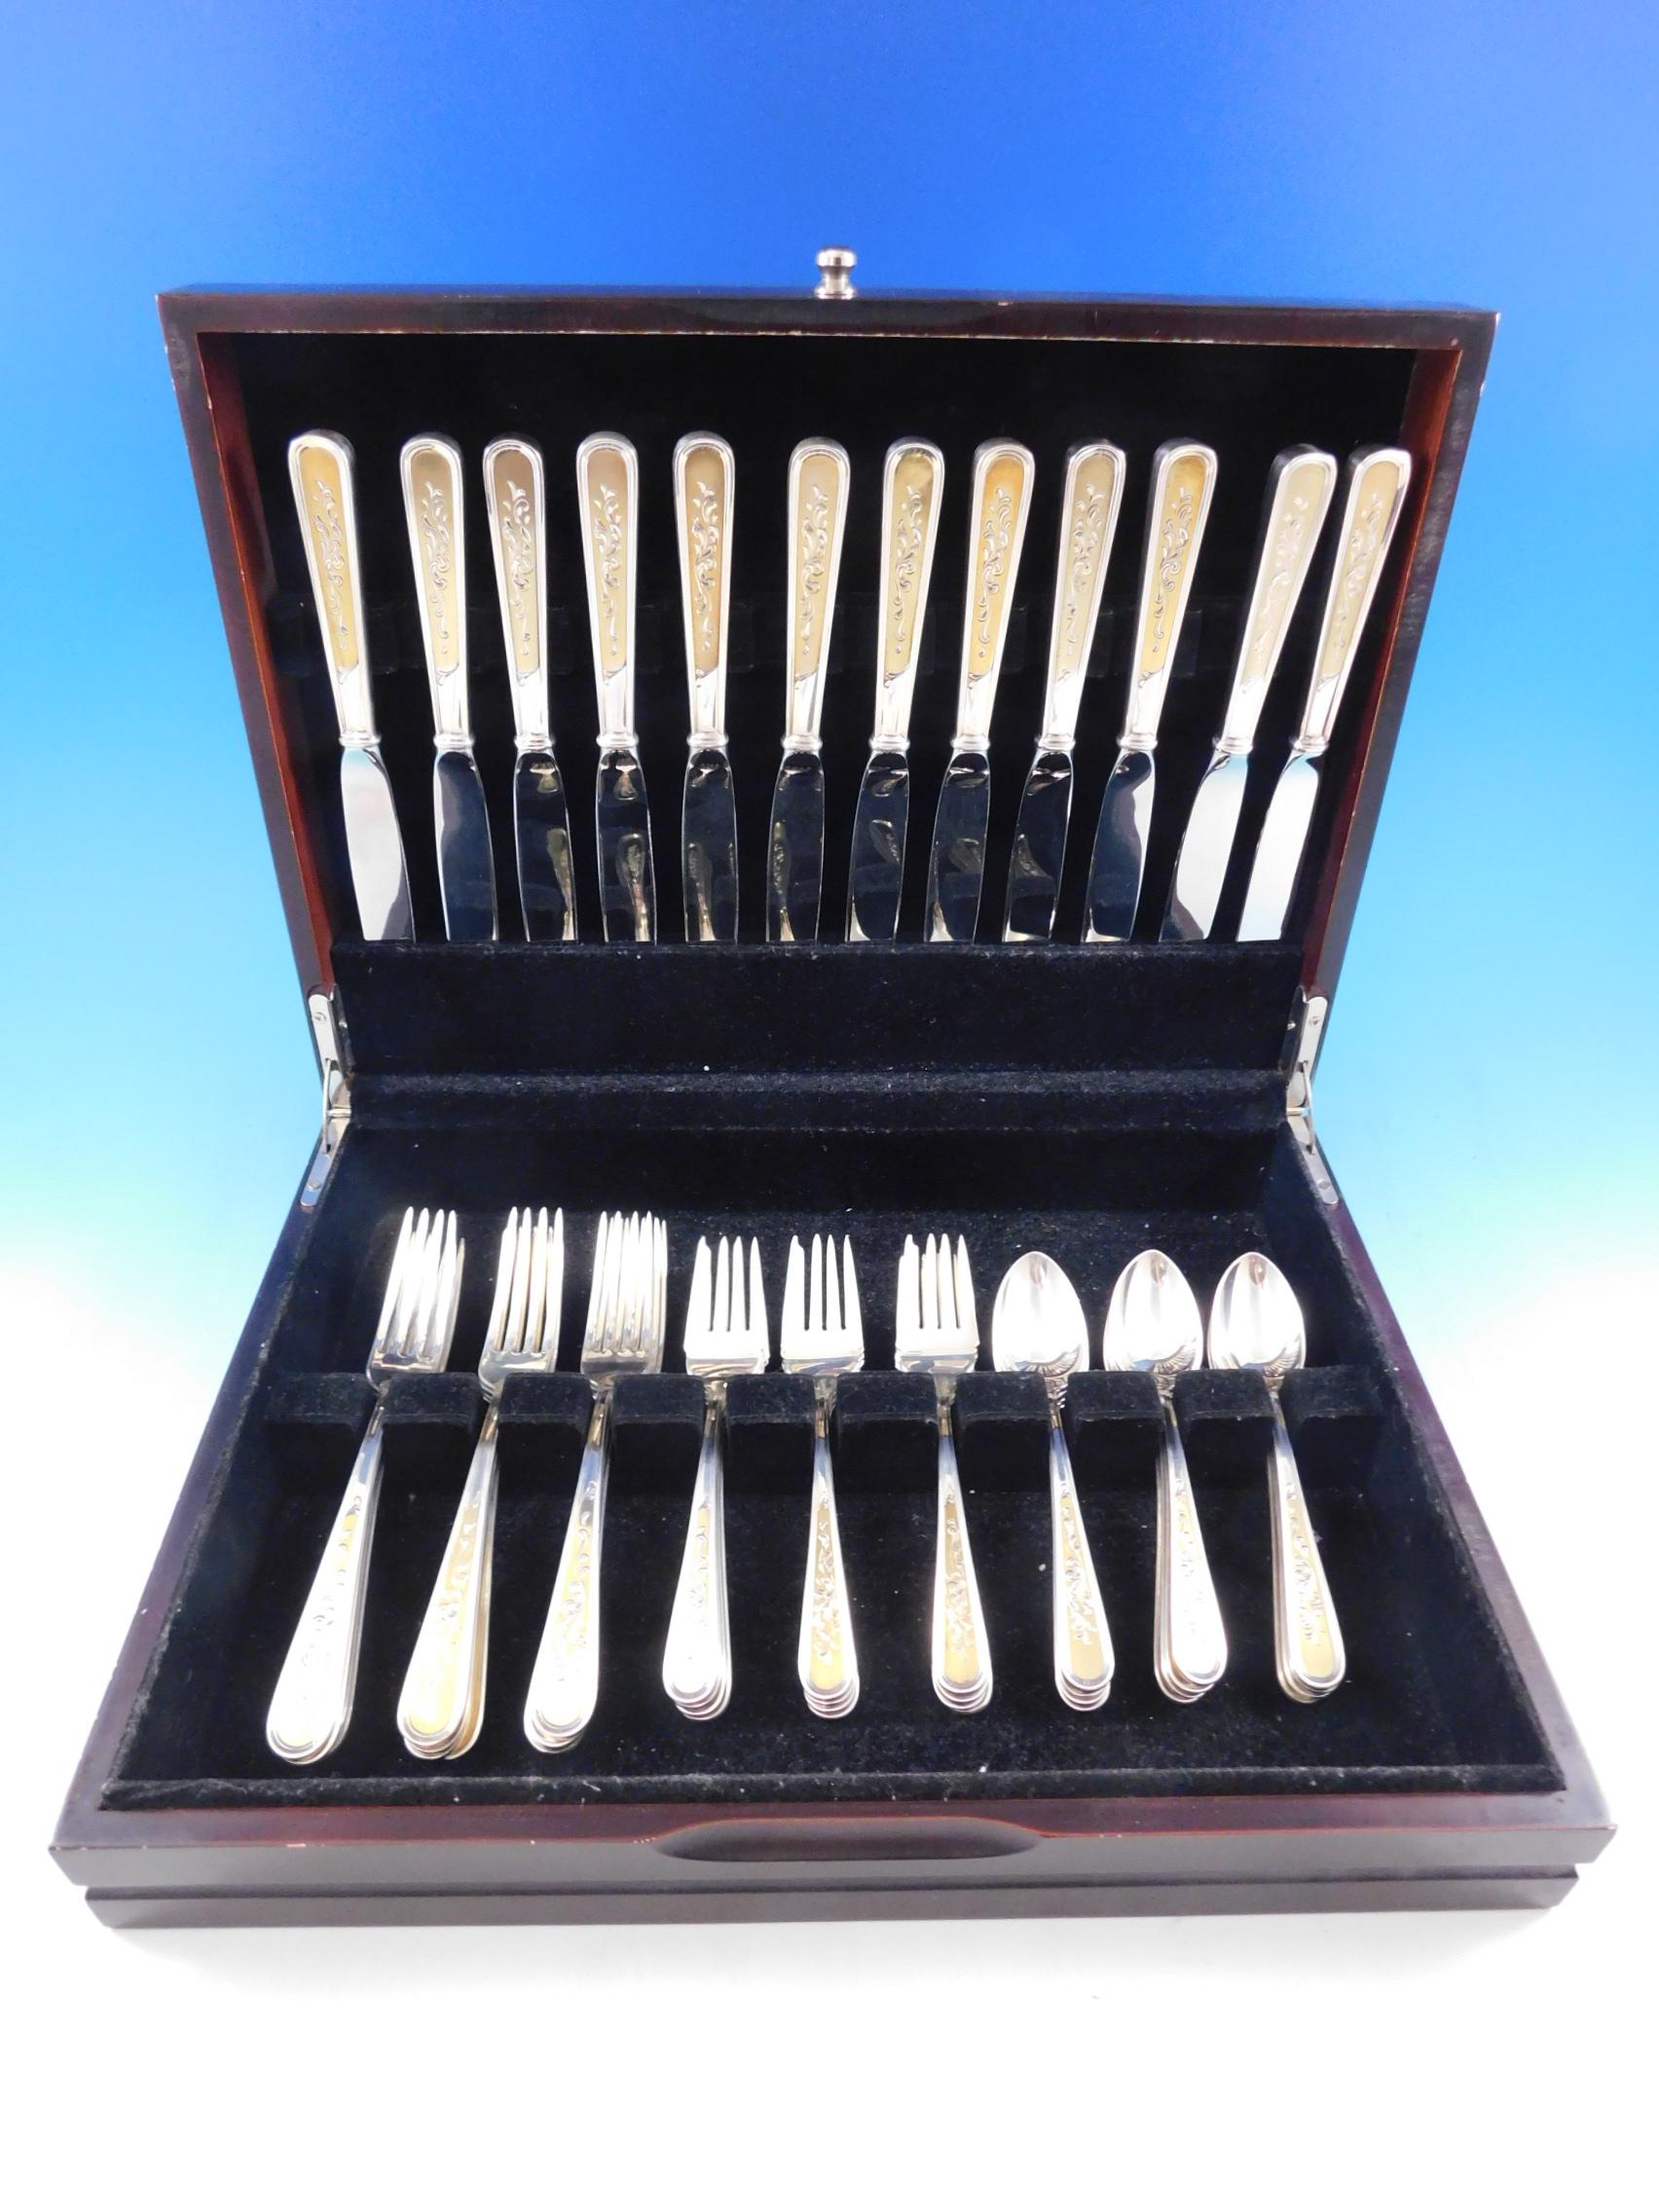 Golden calvert engraved by Kirk-Stieff sterling silver flatware set, 48 pieces. This set includes:

12 knives, 9